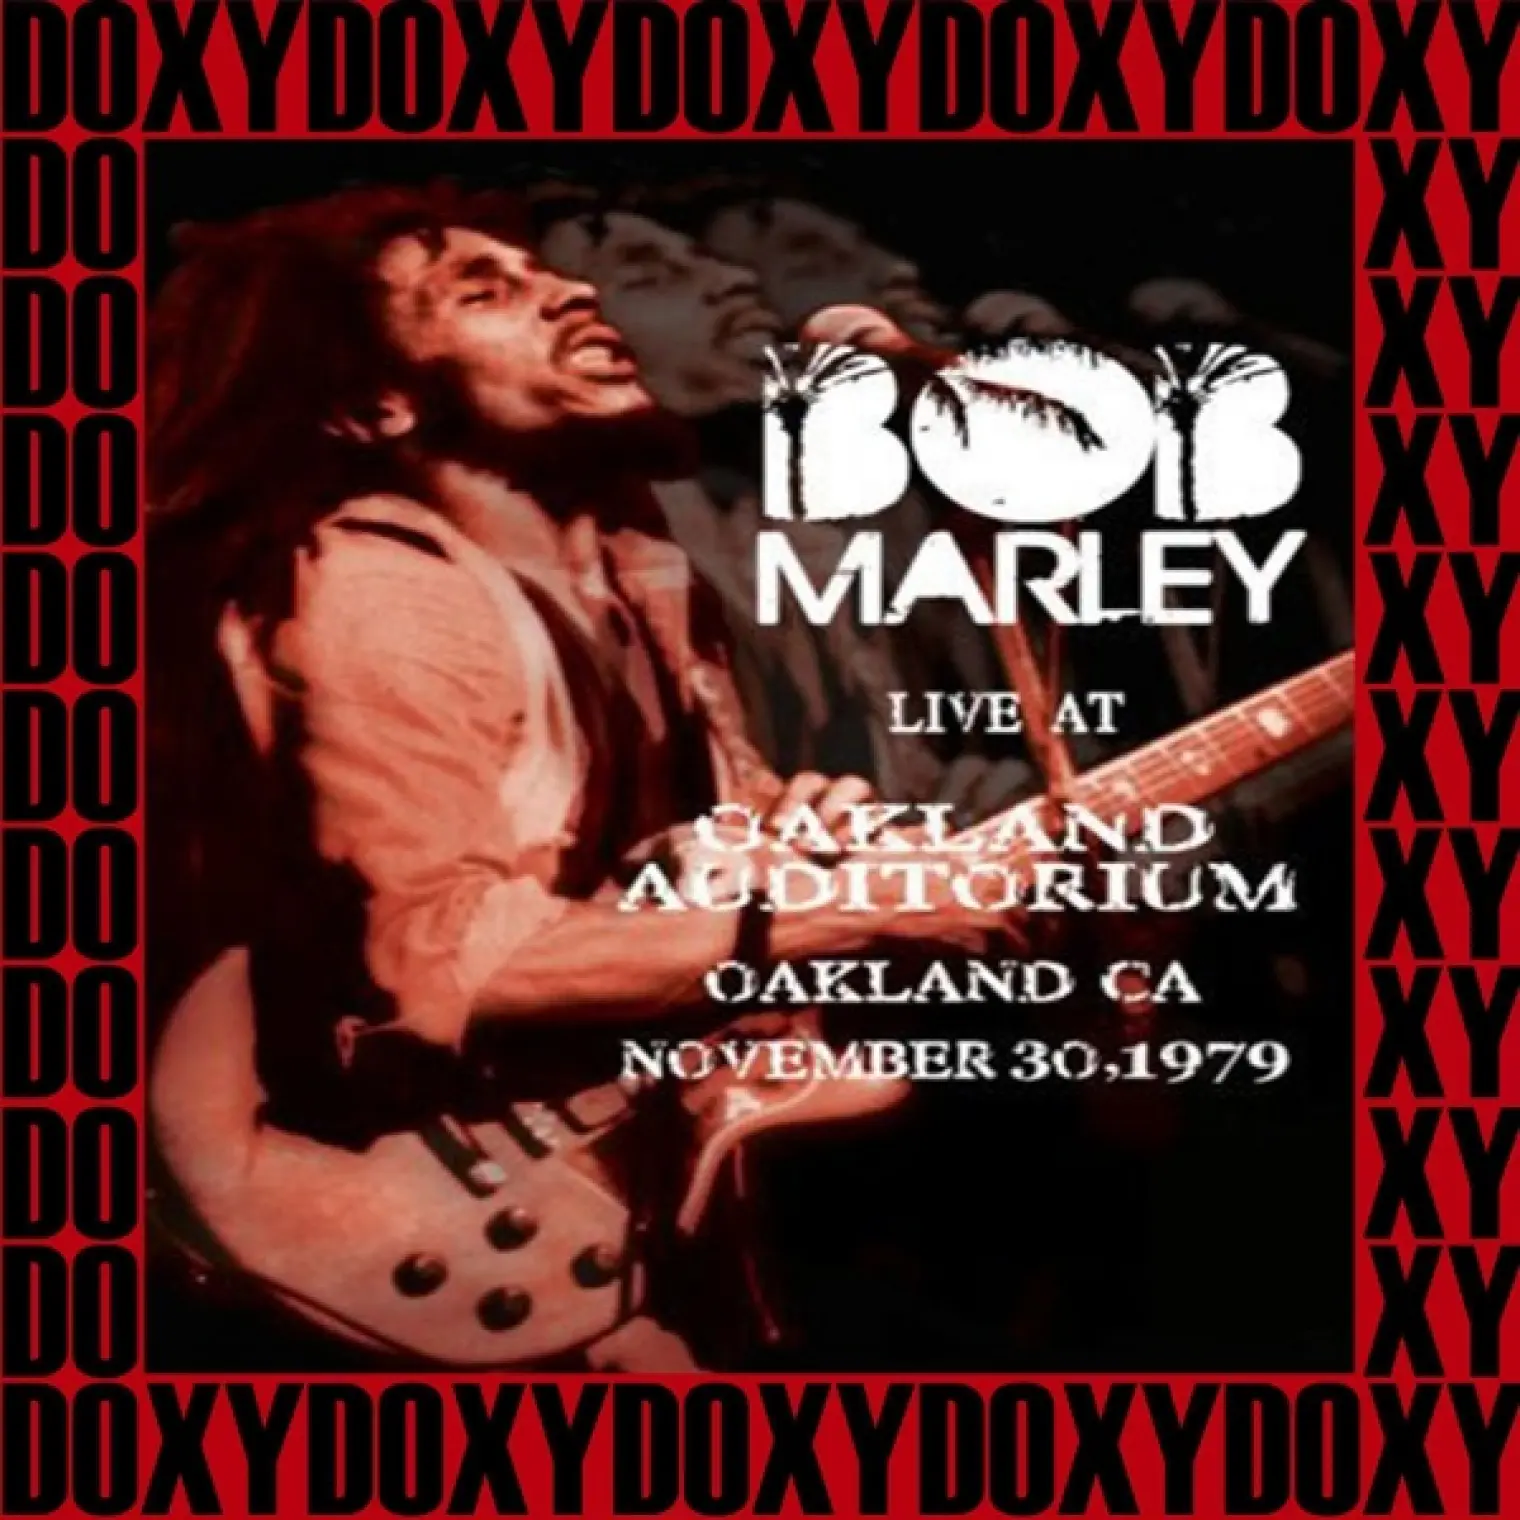 The Complete Concert at Oakland Auditorium, Ca. Nov 30th, 1979 (feat. The Wailers) (Doxy Collection, Remastered, Live on Fm Broadcasting) -  Bob Marley 